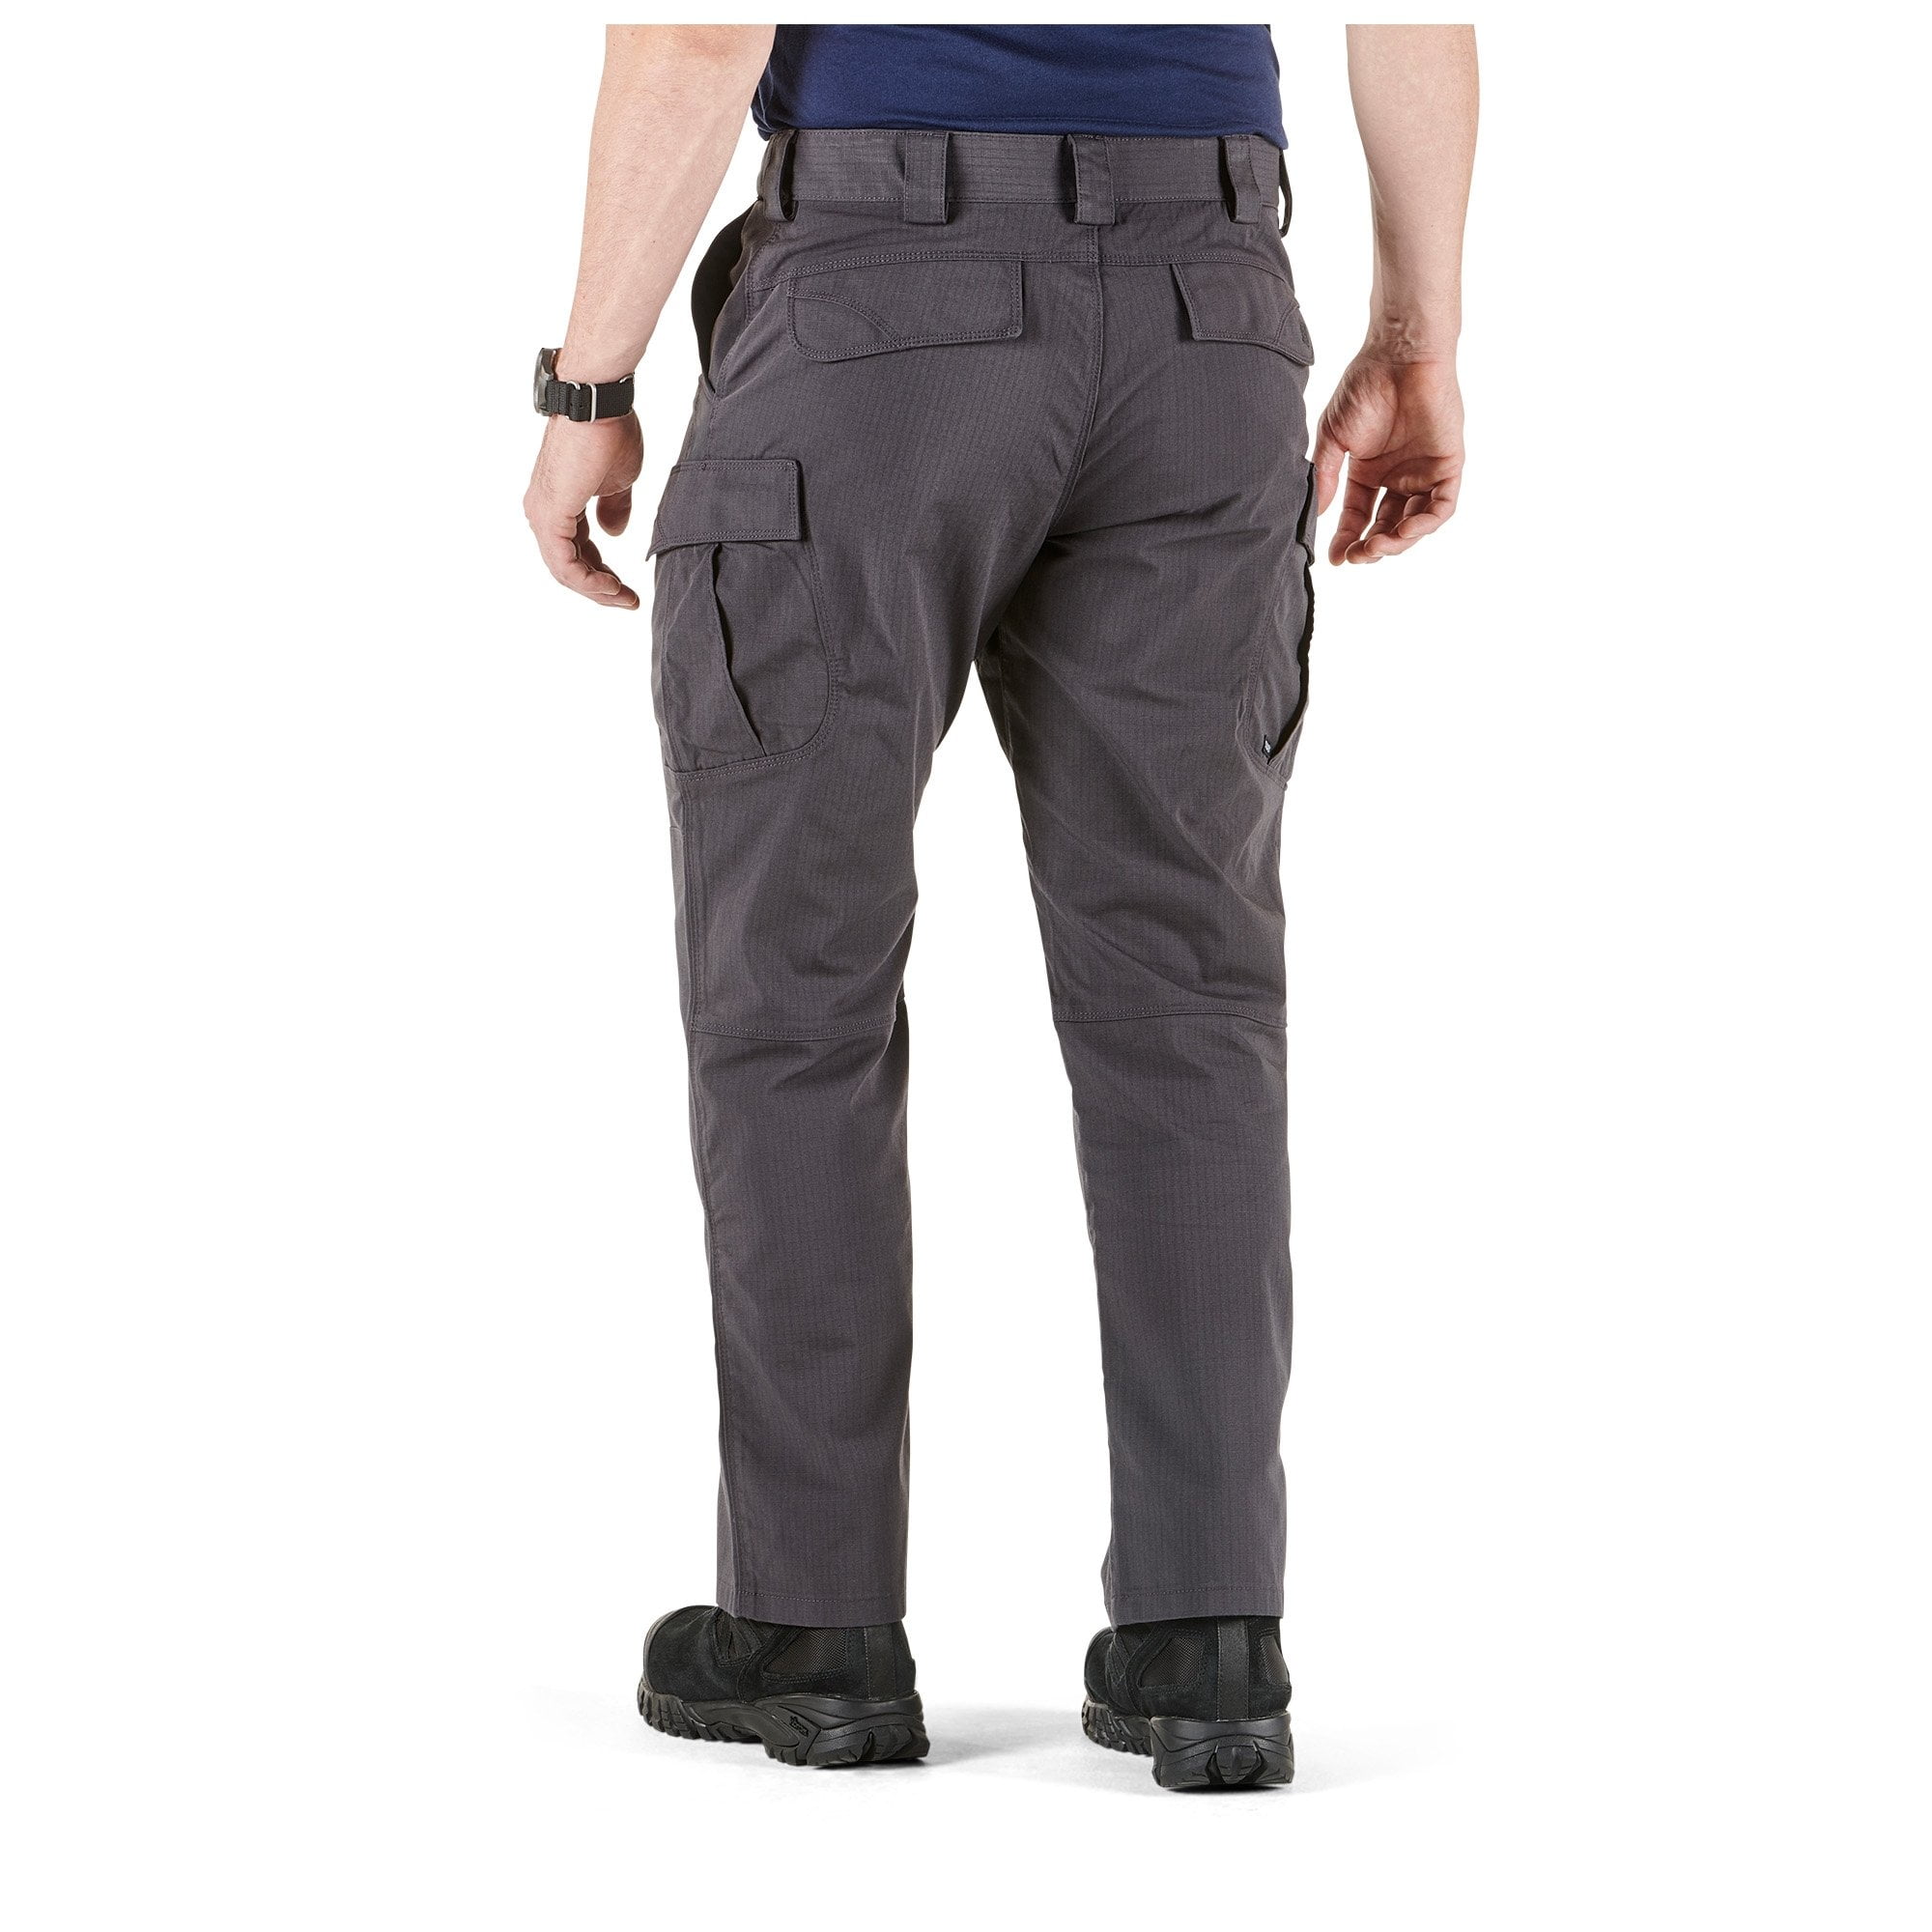  5.11 Tactical Men's Stryke Military Pants, Adjustable  Waistband, Stretchable Flex-Tac Fabric, Khaki, 28Wx30L, Style 74369 :  Clothing, Shoes & Jewelry